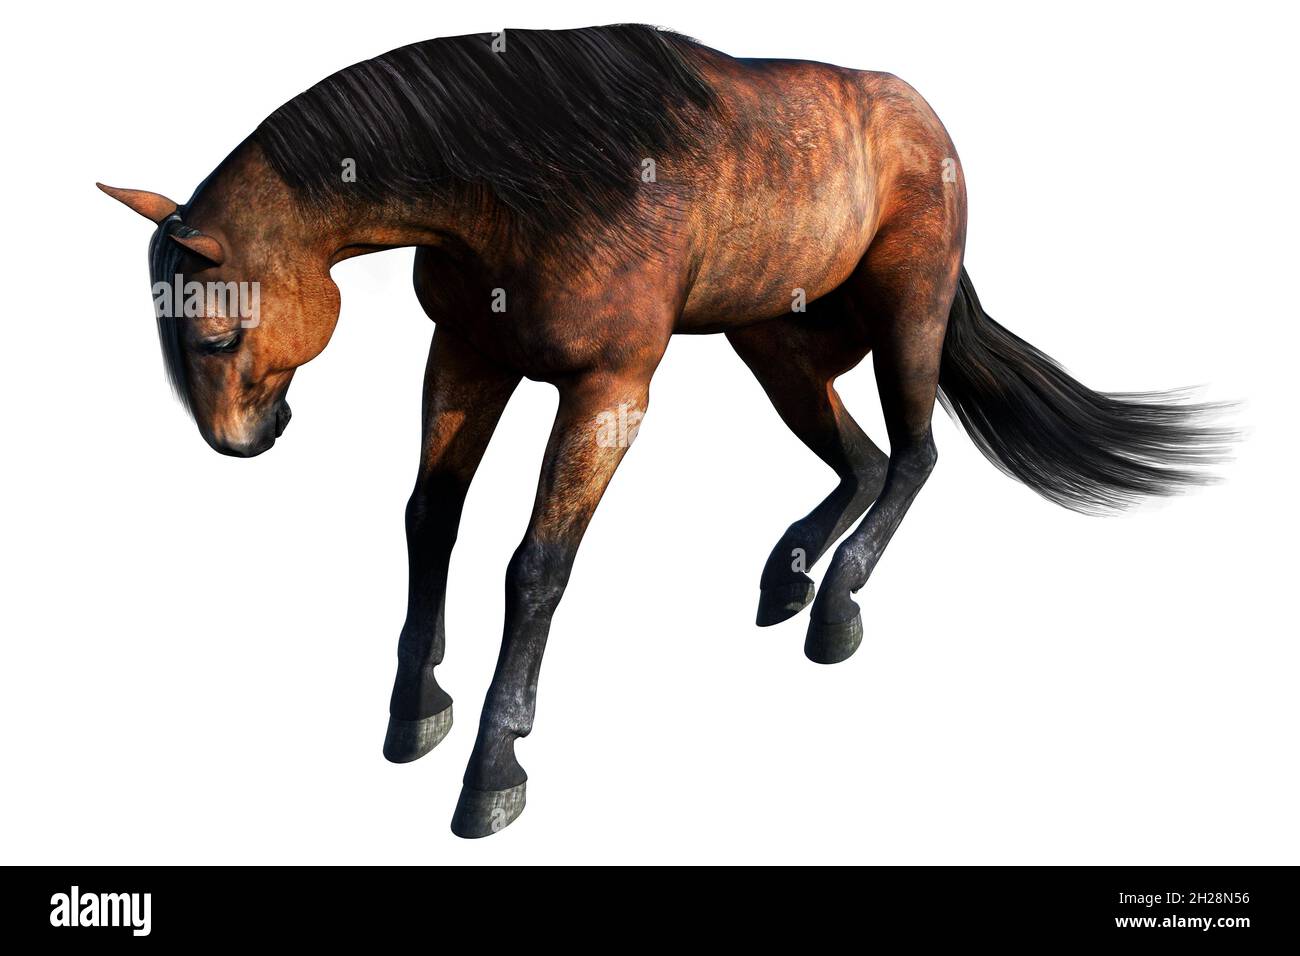 horse isolated, brown horse, horse, 3D illustration, horse 3D rendering, bay horse, horse standing Stock Photo